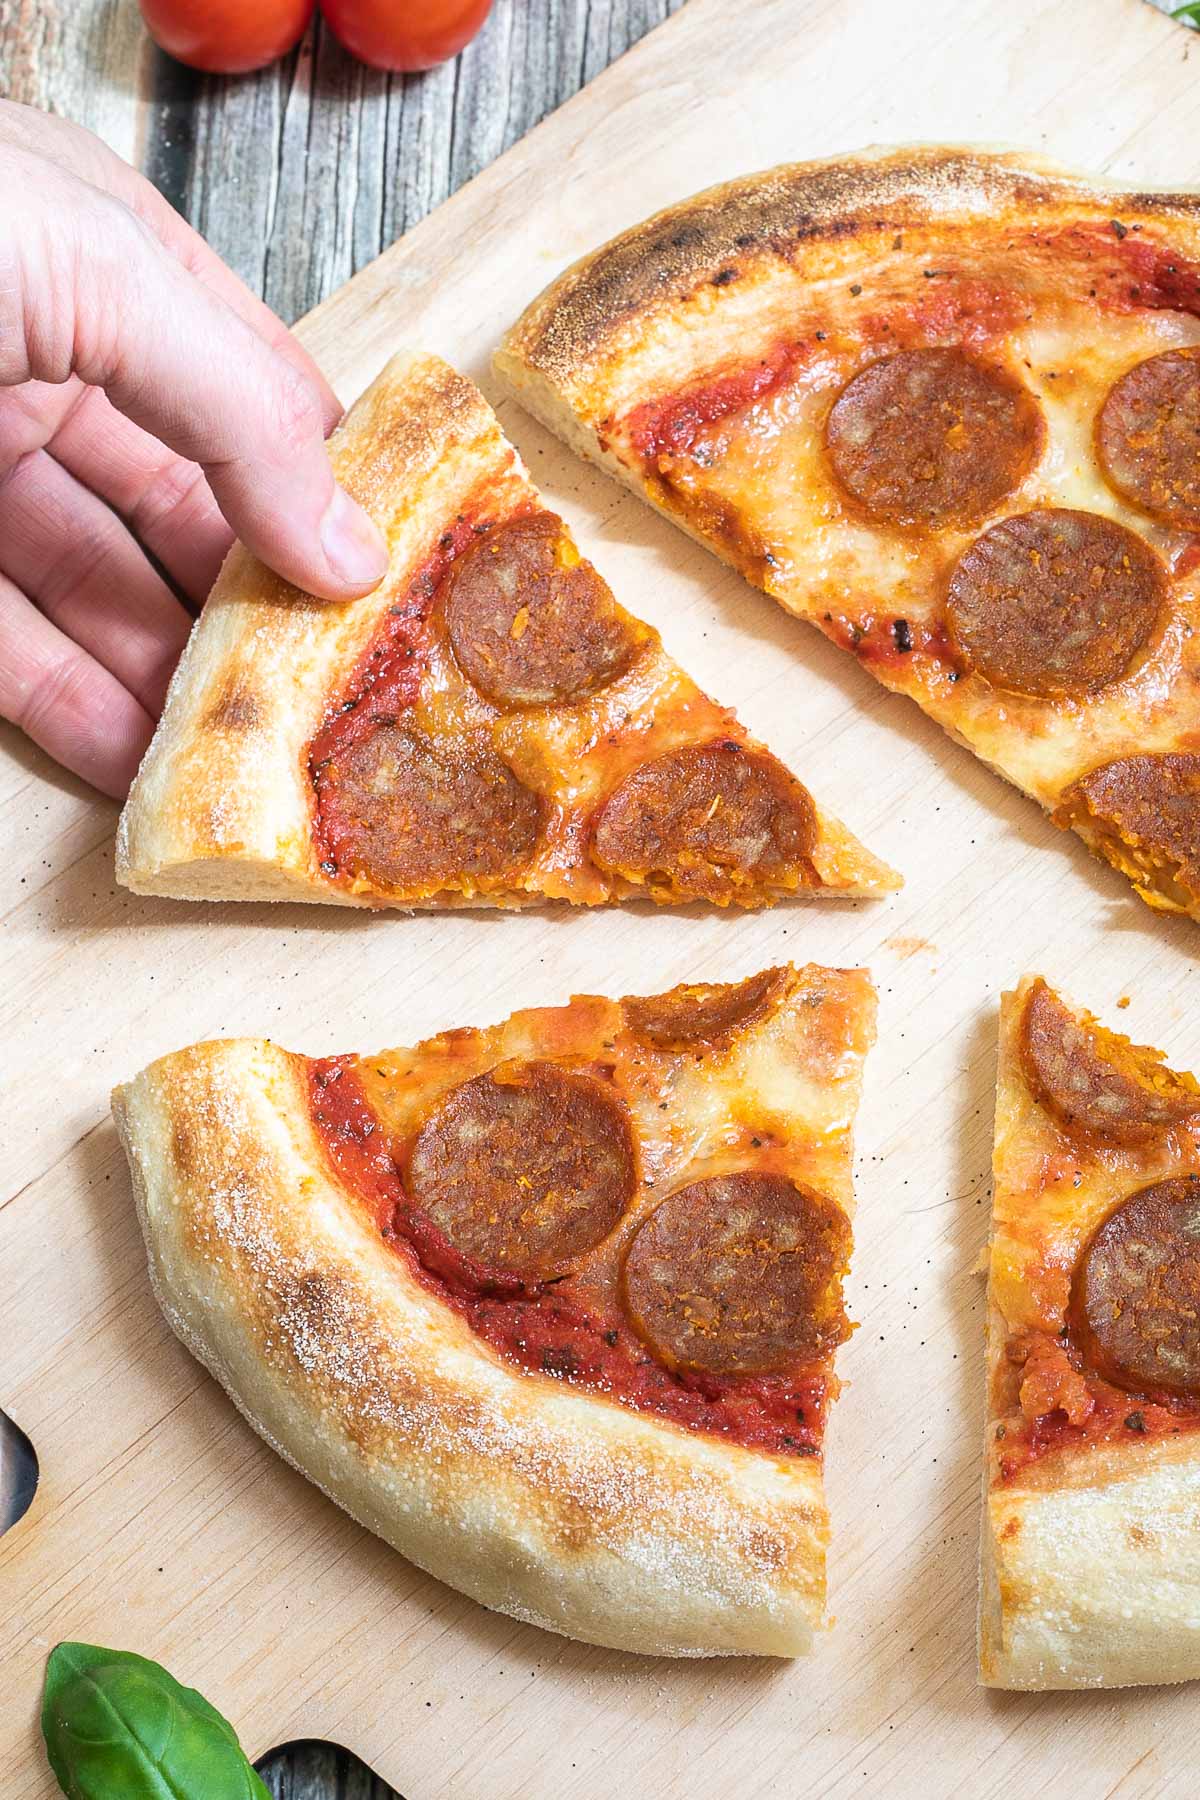 Sliced pizza on a wooden baker's peel topped with tomato sauce, melted cheese and pepperoni slices. A hand is taking a slice.